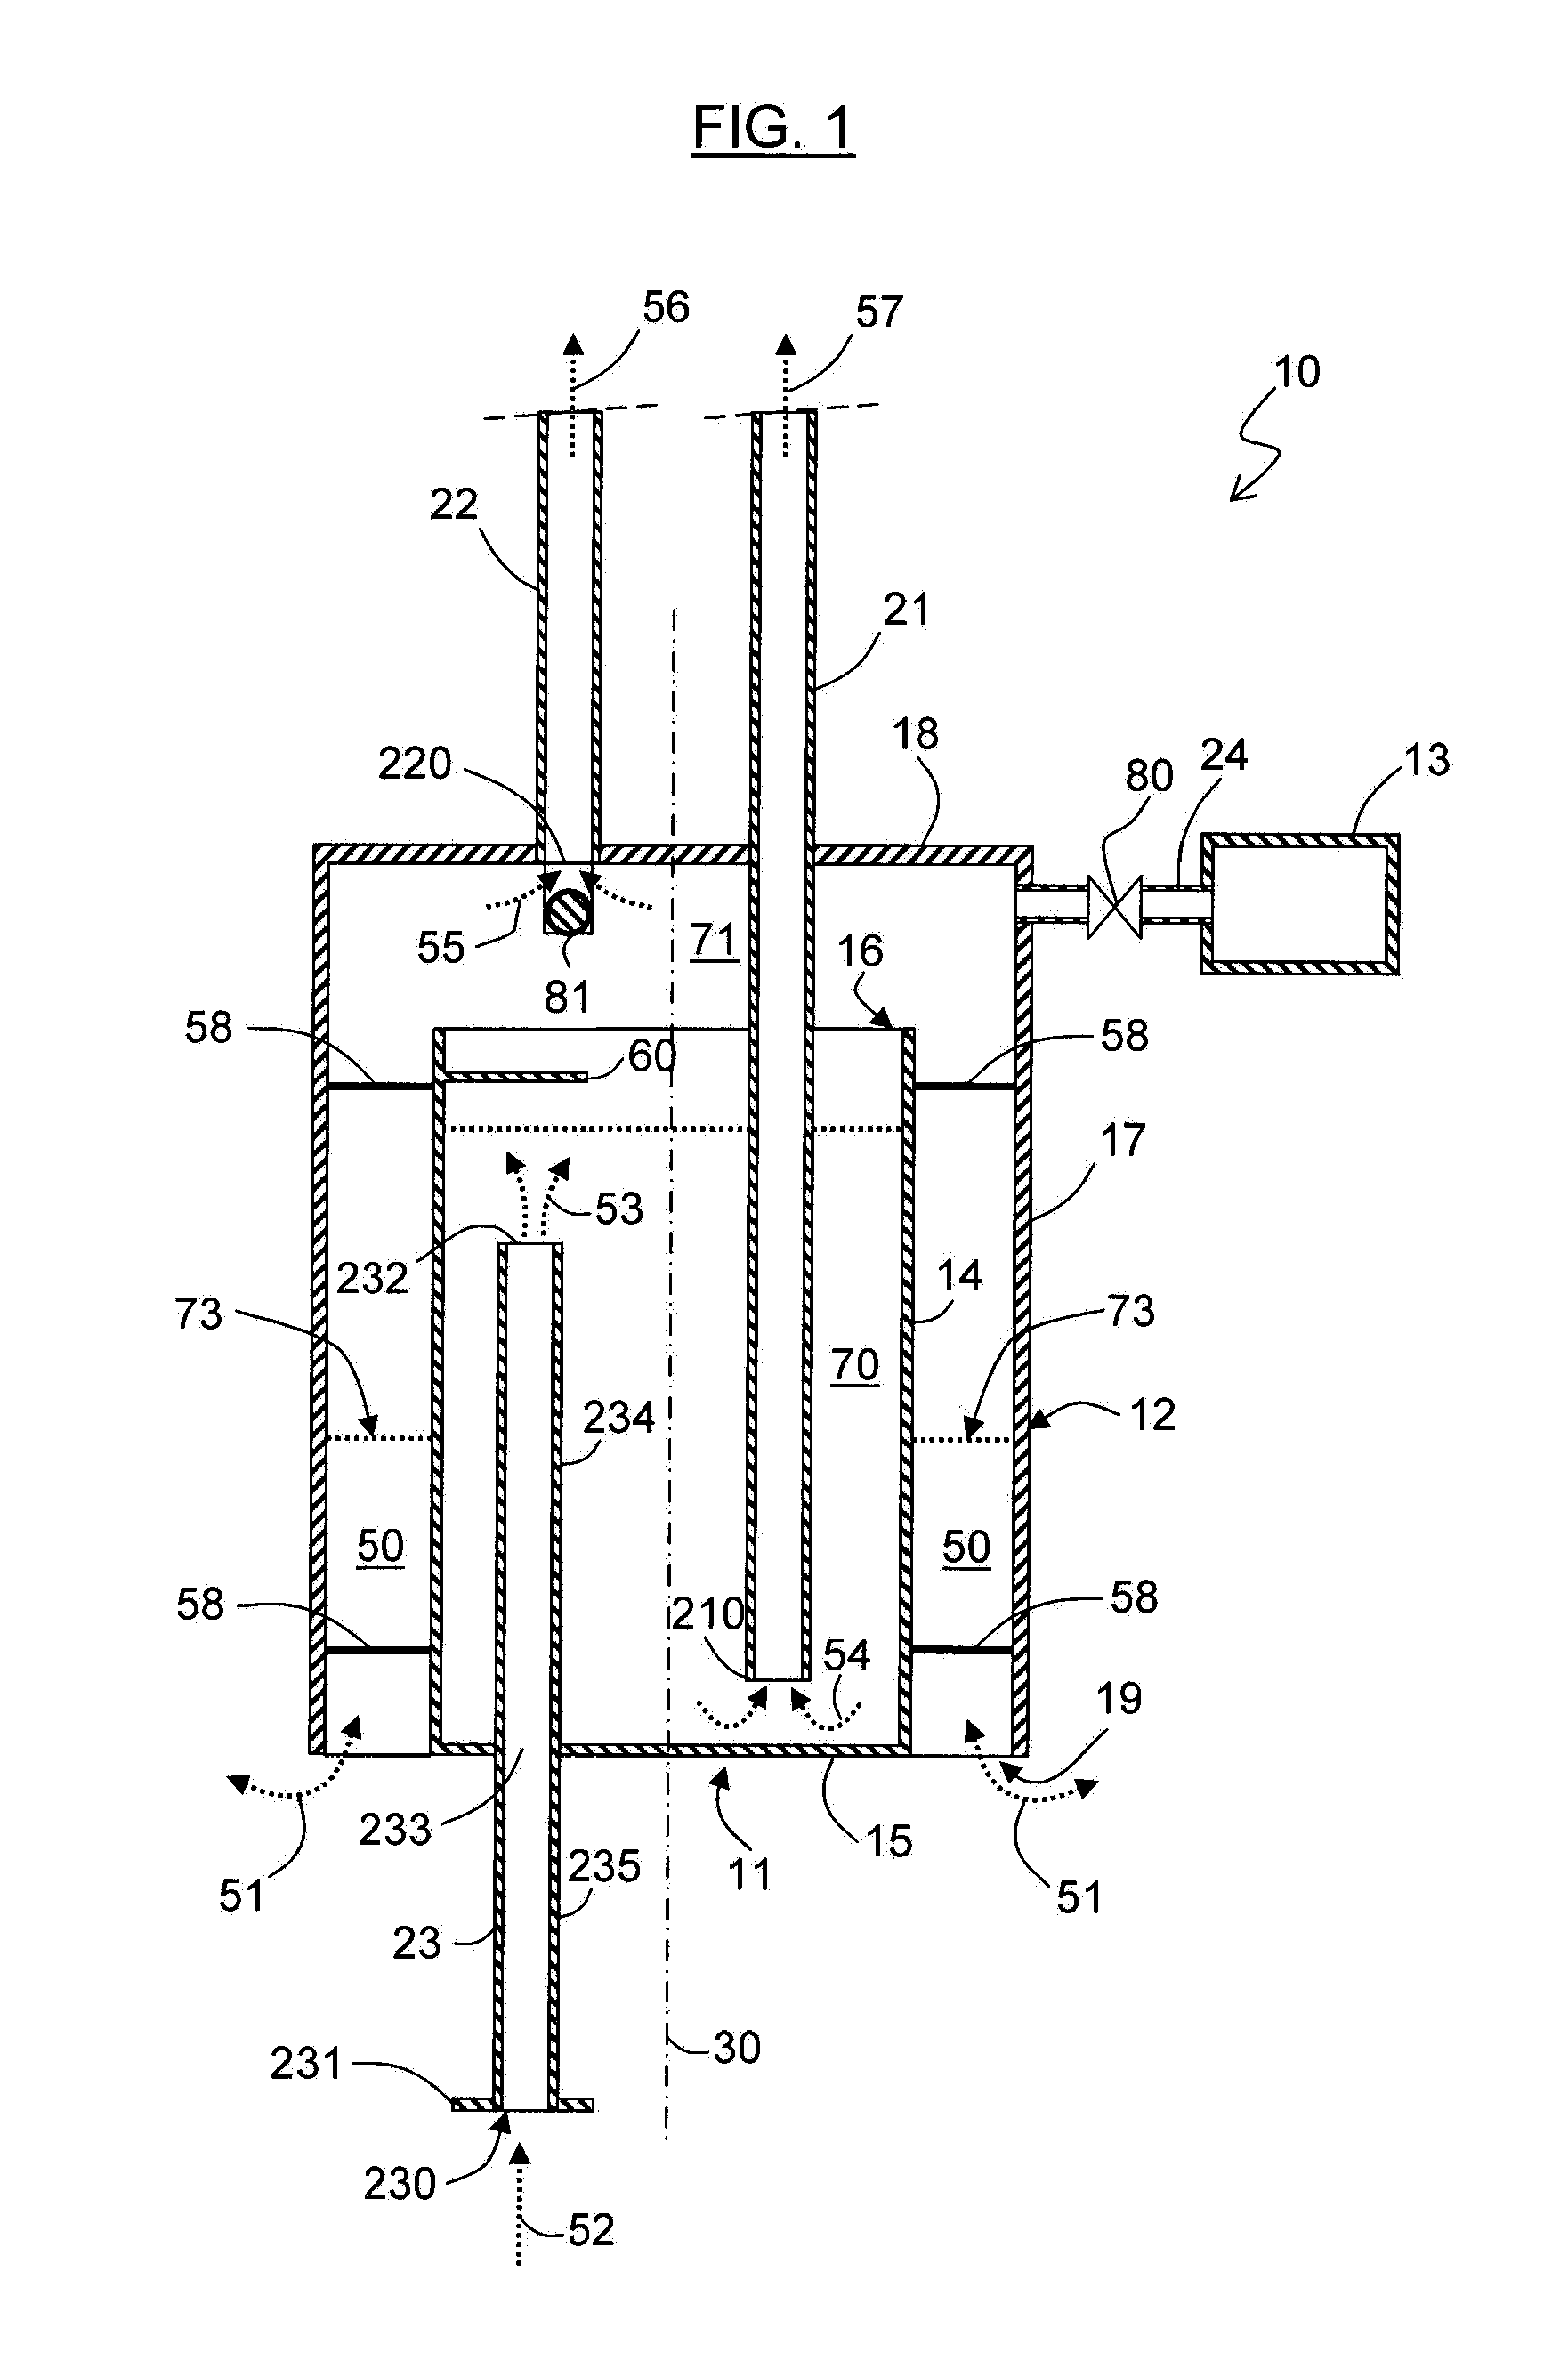 Method and device for collecting a light underwater fluid such as fresh water or hydrocarbons